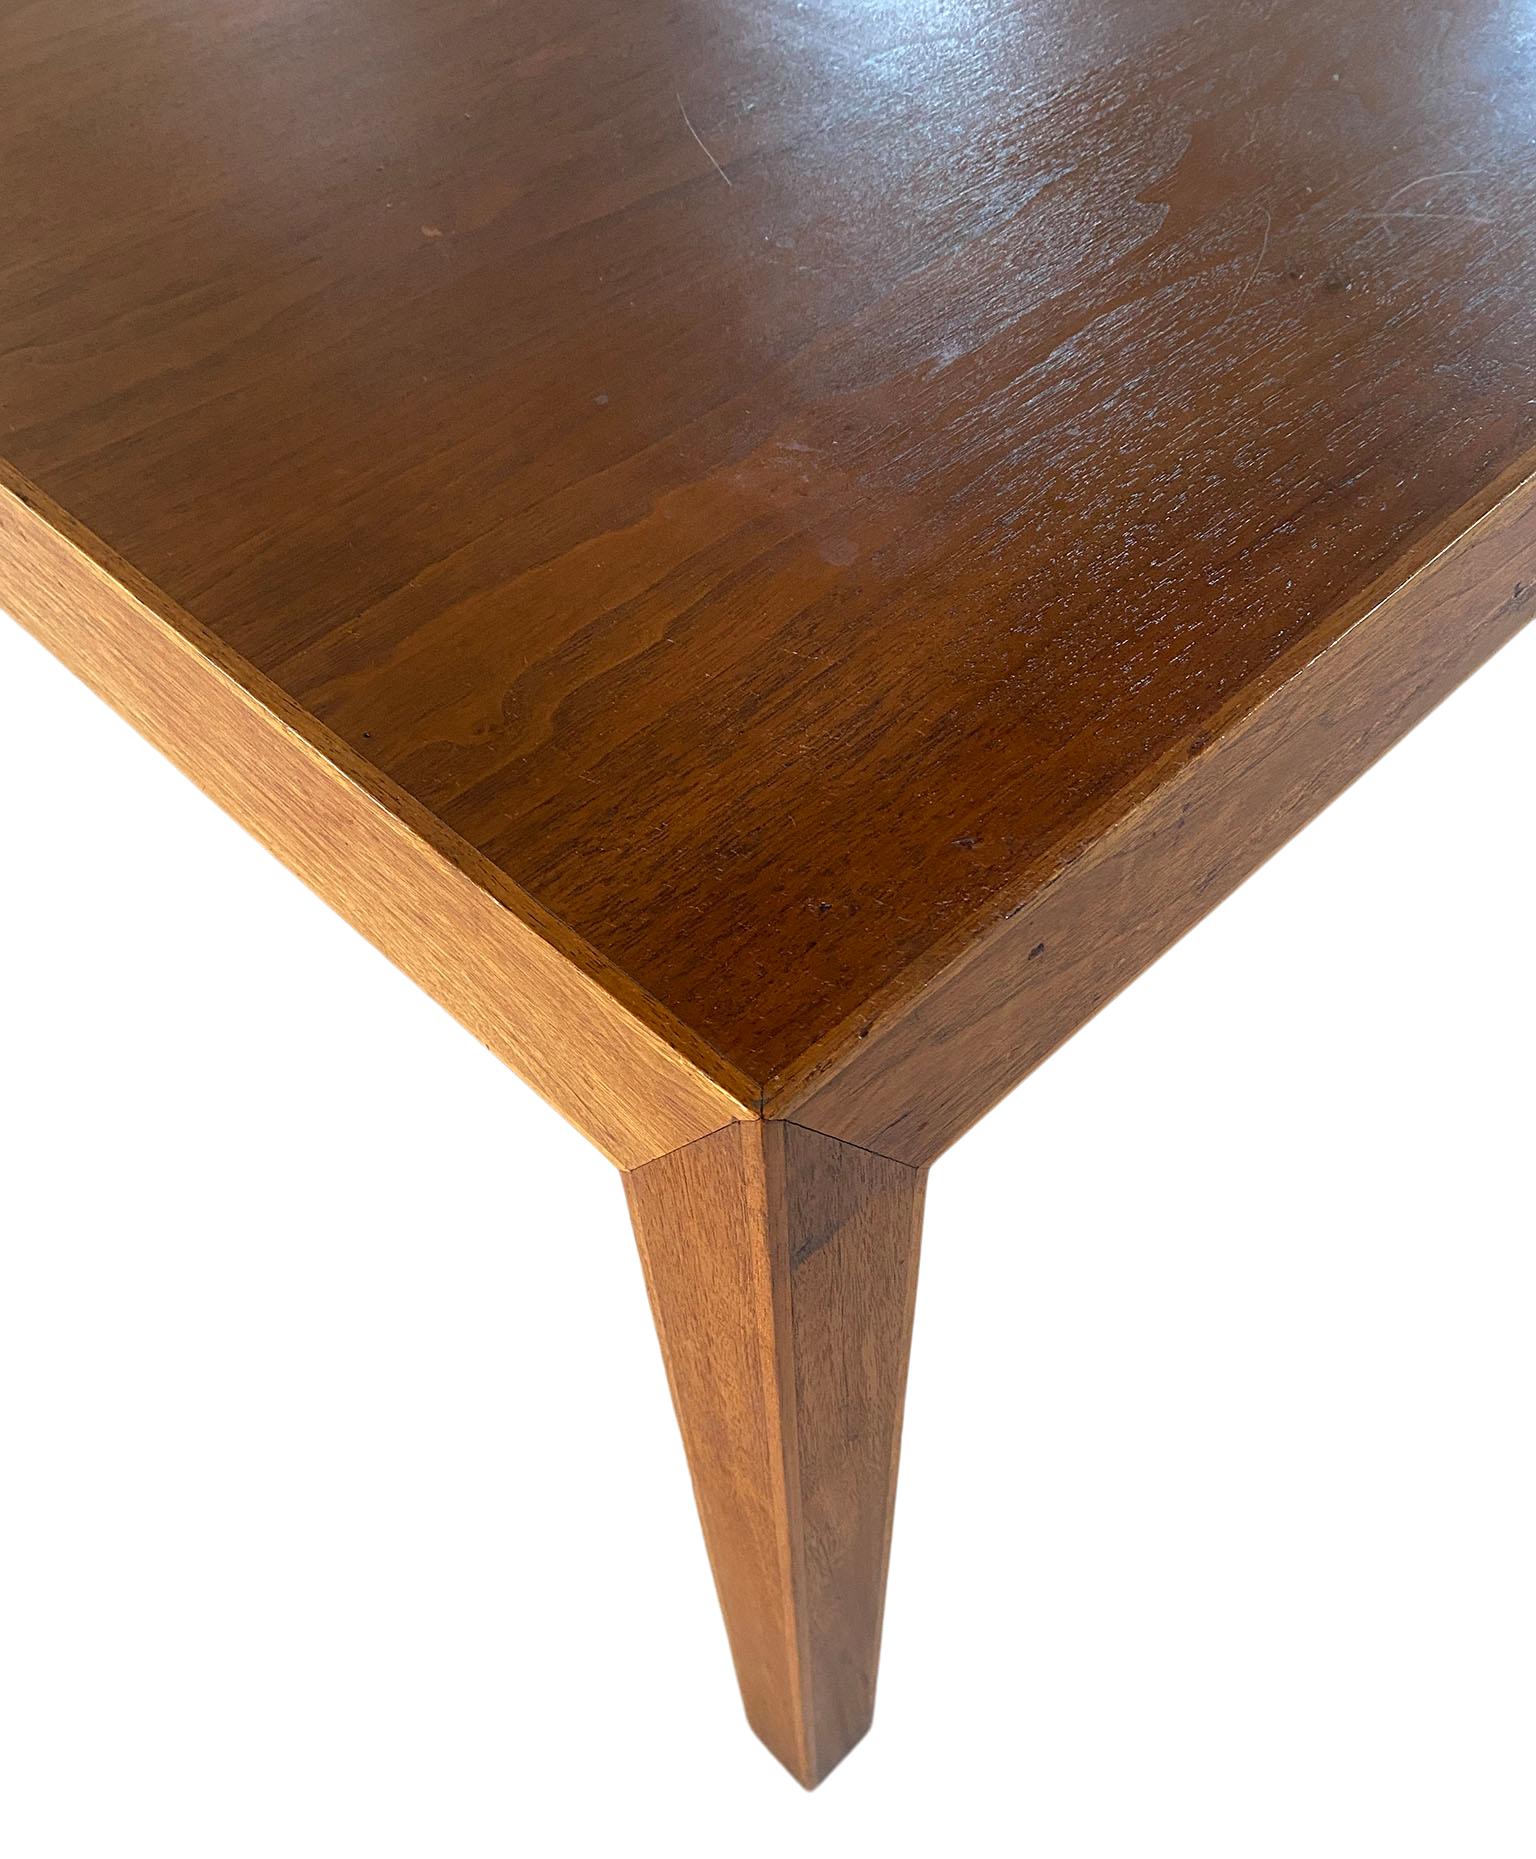 Midcentury Milo Baughman Walnut Expandable Parsons Dining Table with '2' Leaves 3